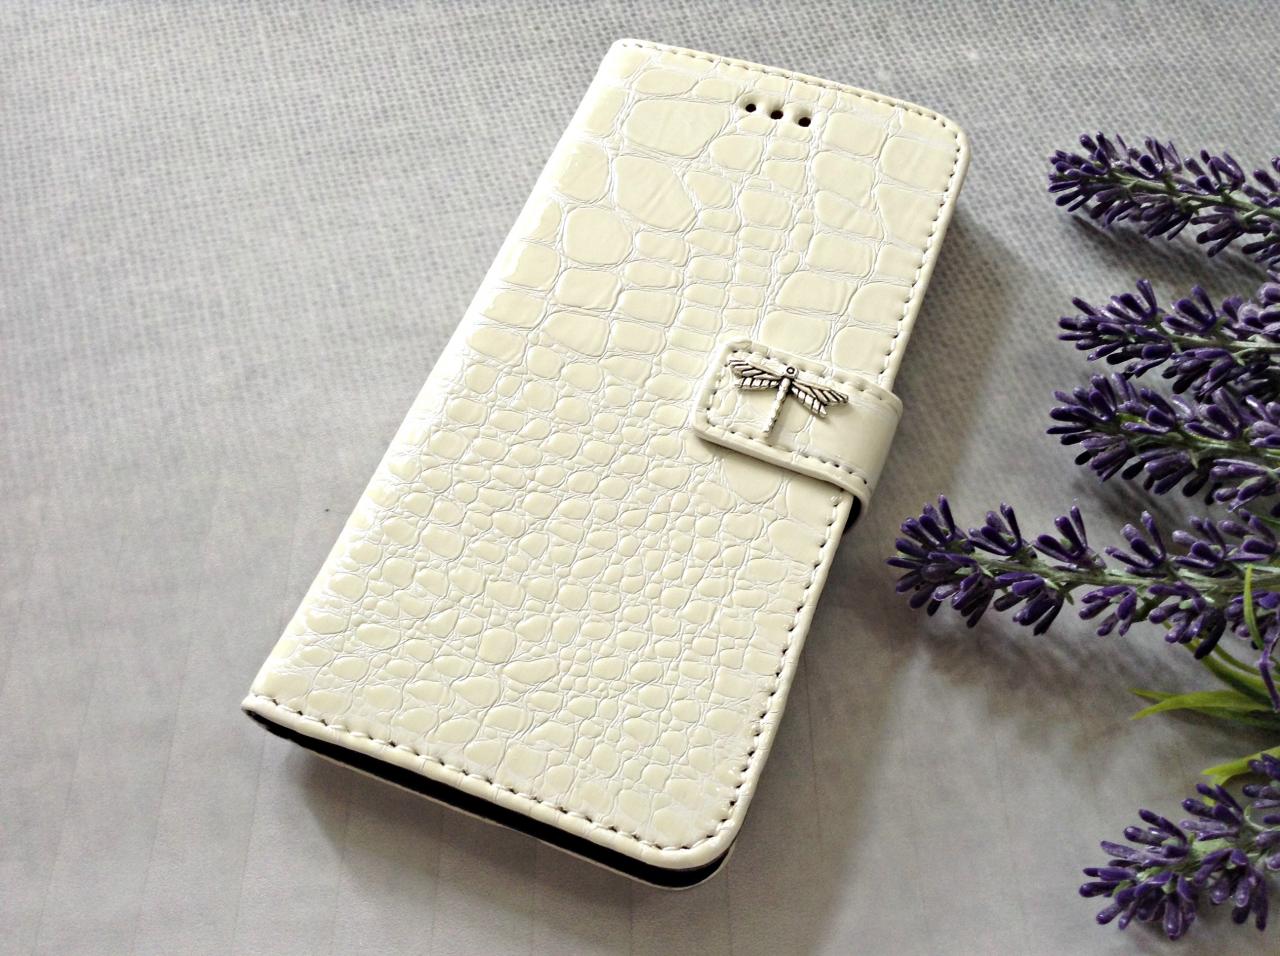 Dragonfly Iphone 6 Wallet Case, Iphone 6 Plus Wallet Case, Iphone 5 5s 5c Wallet Case, Samsung Galaxy S5 S4 S3 Wallet Case, Samsung Galaxy Note 4